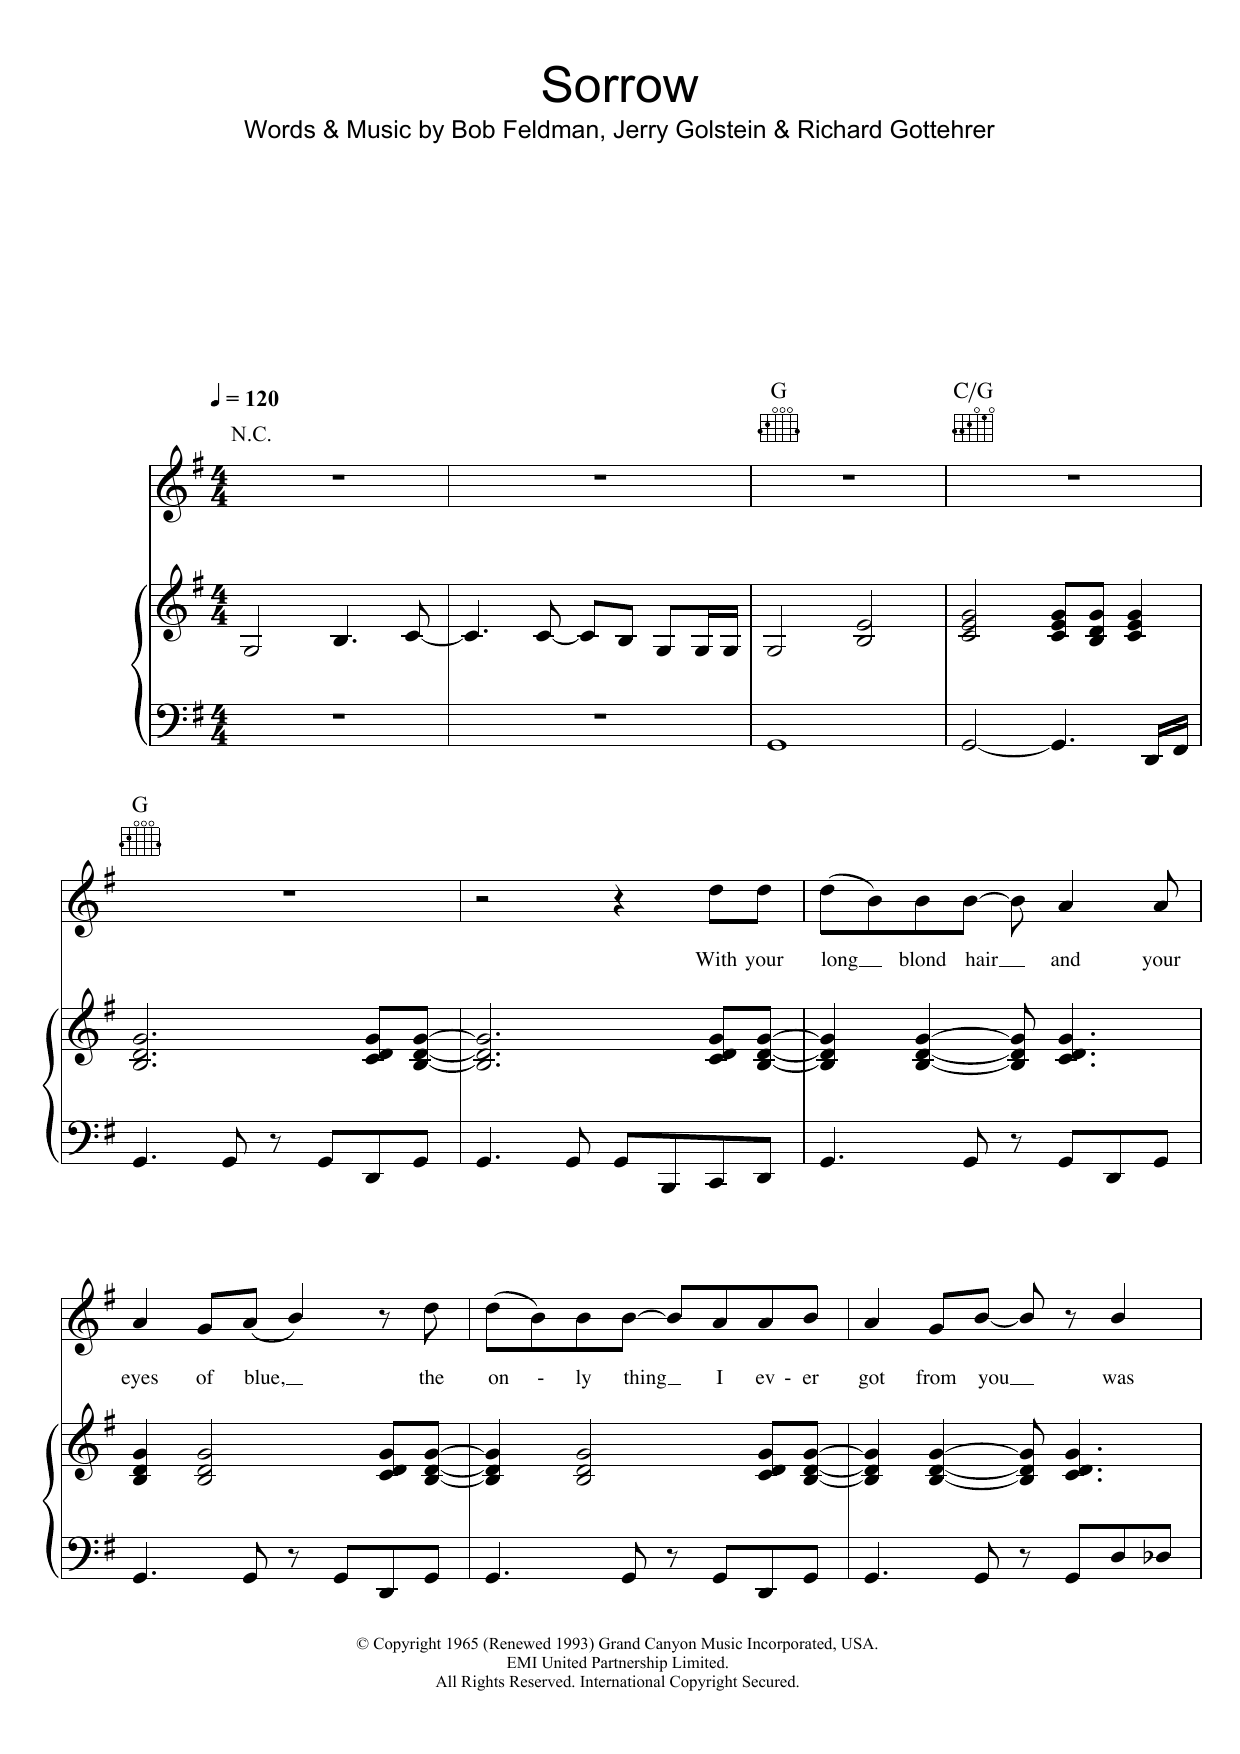 David Bowie Sorrow sheet music notes and chords. Download Printable PDF.